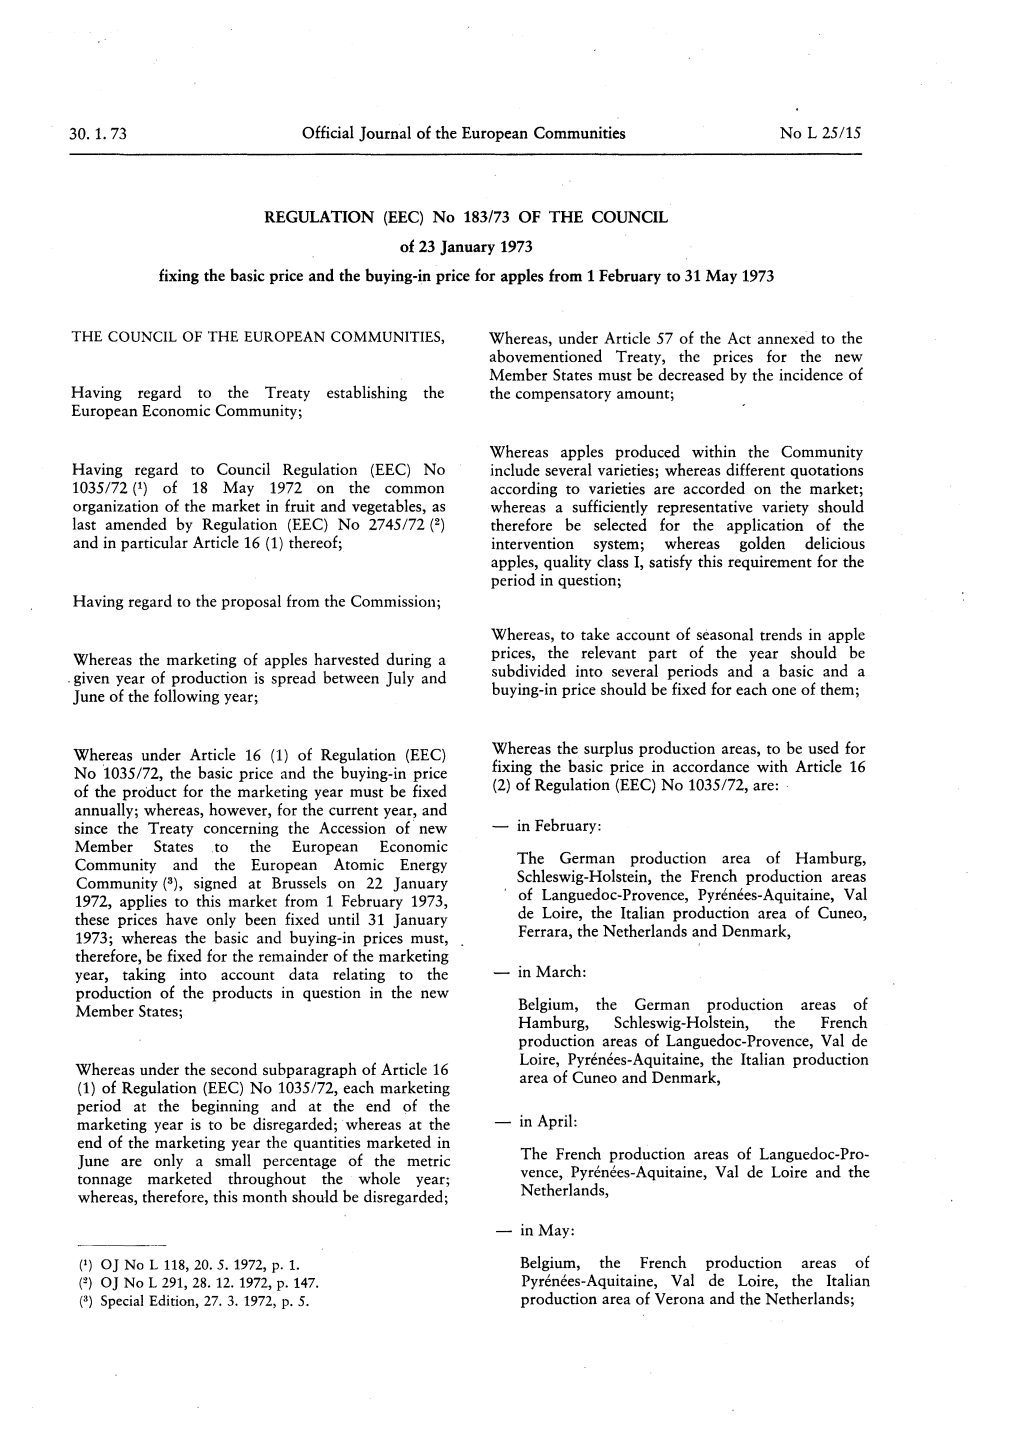 Official Journal of the European Communities of 23 January 1973